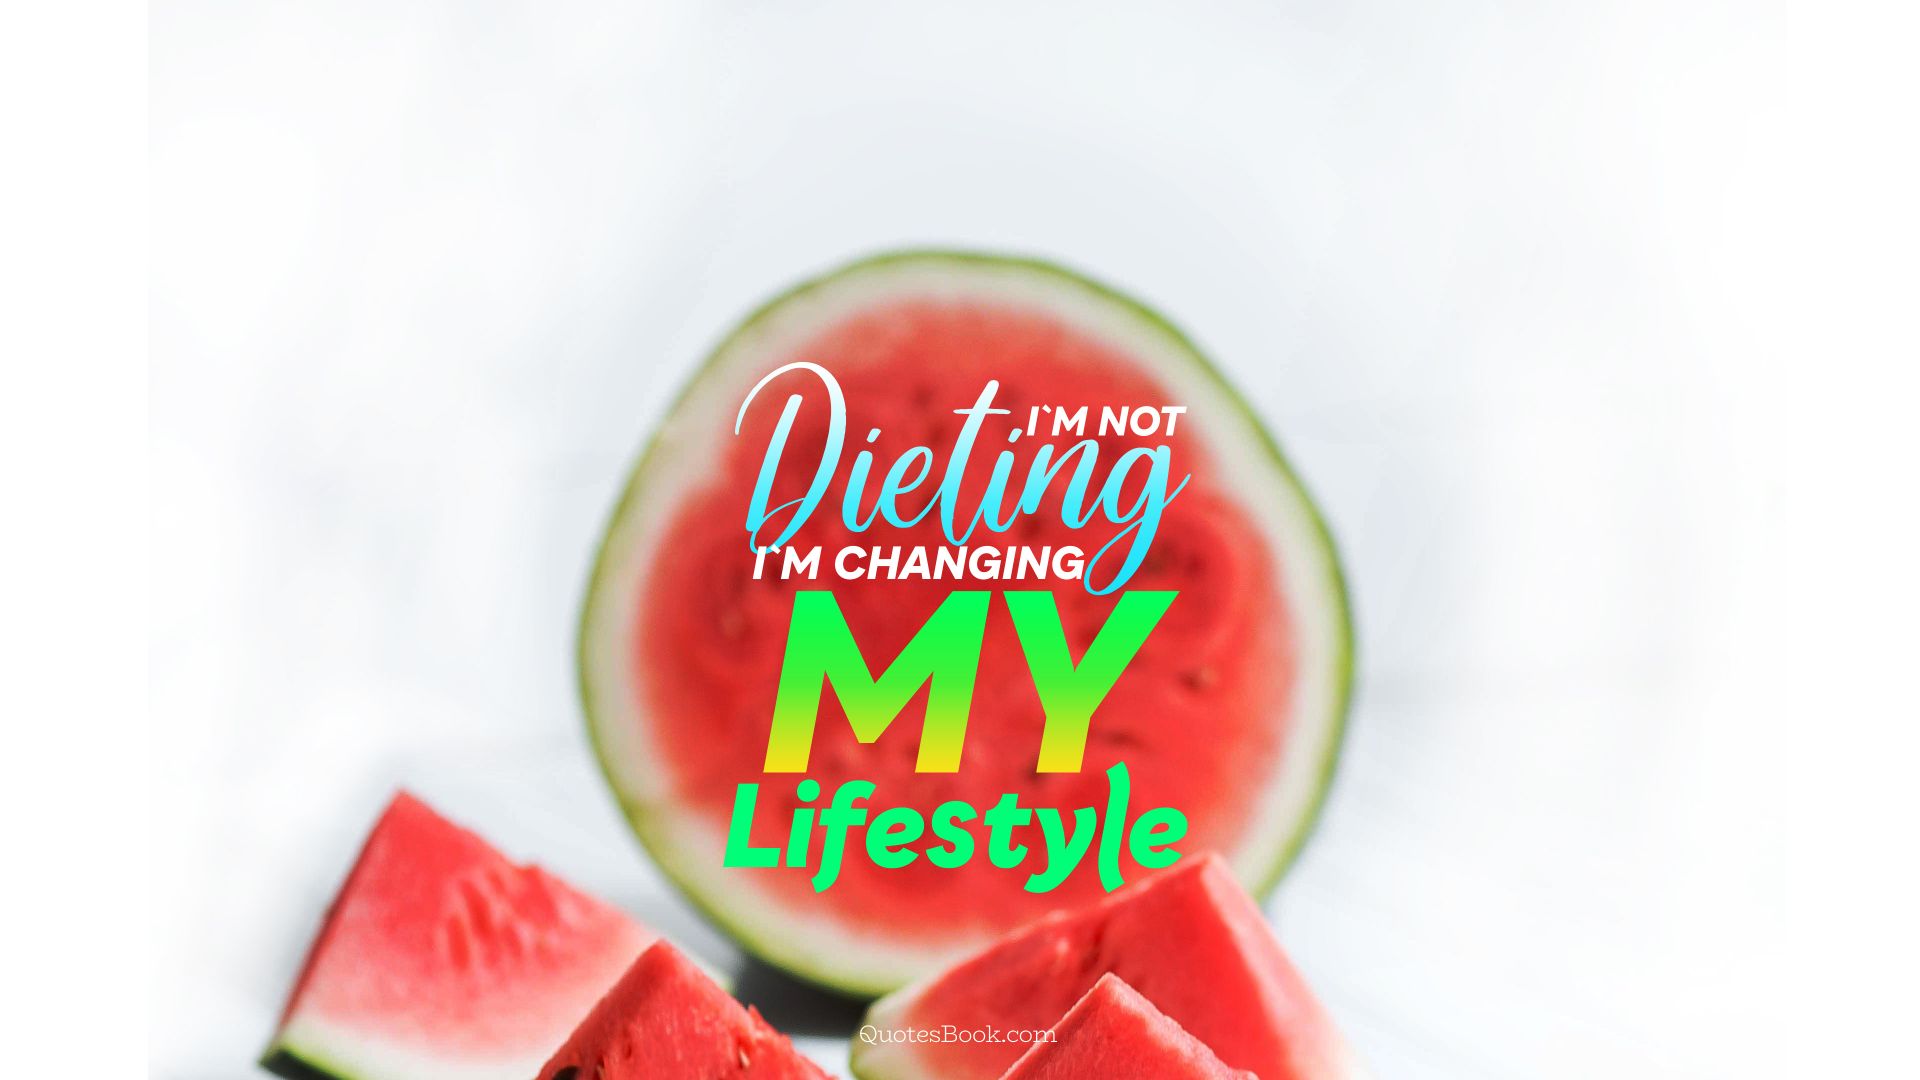 I'm not dieting i'm changing my lifestyle